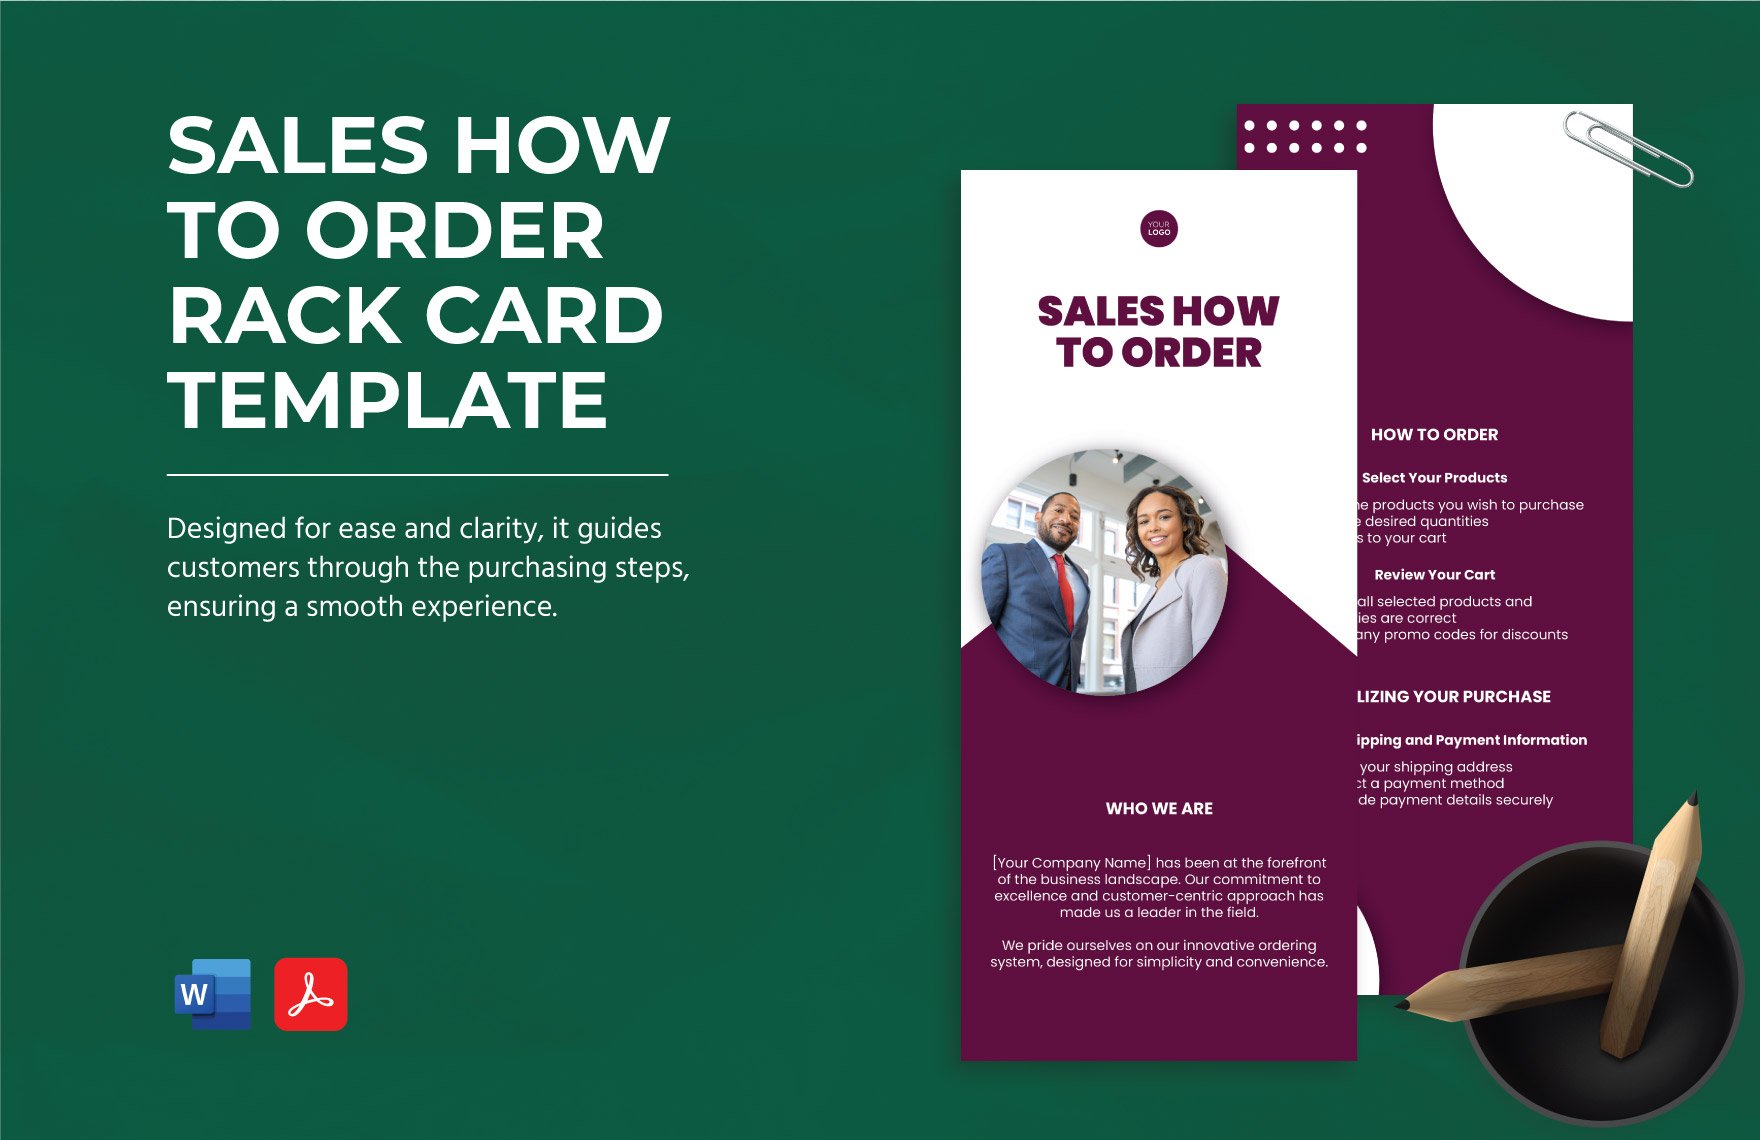 Sales How to Order Rack Card Template